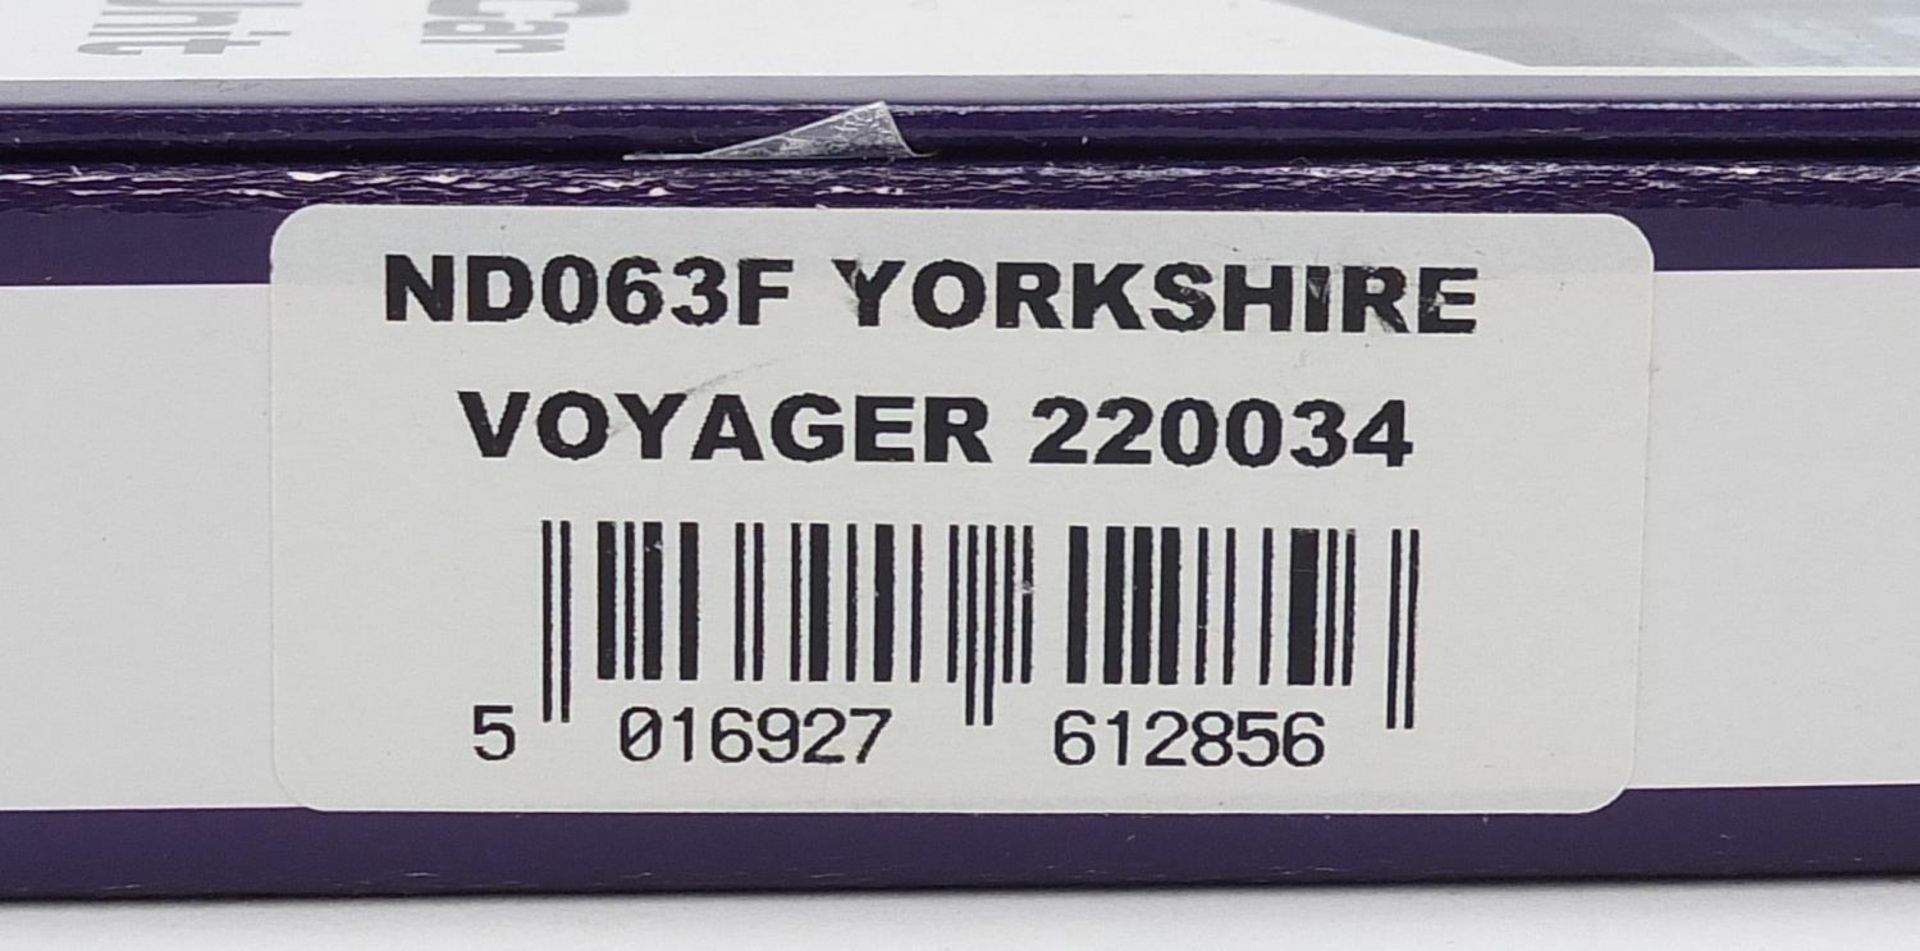 Dapol N gauge model railway The Yorkshire Voyager Four Car Multiple Unit set with box, number ND063F - Image 3 of 3